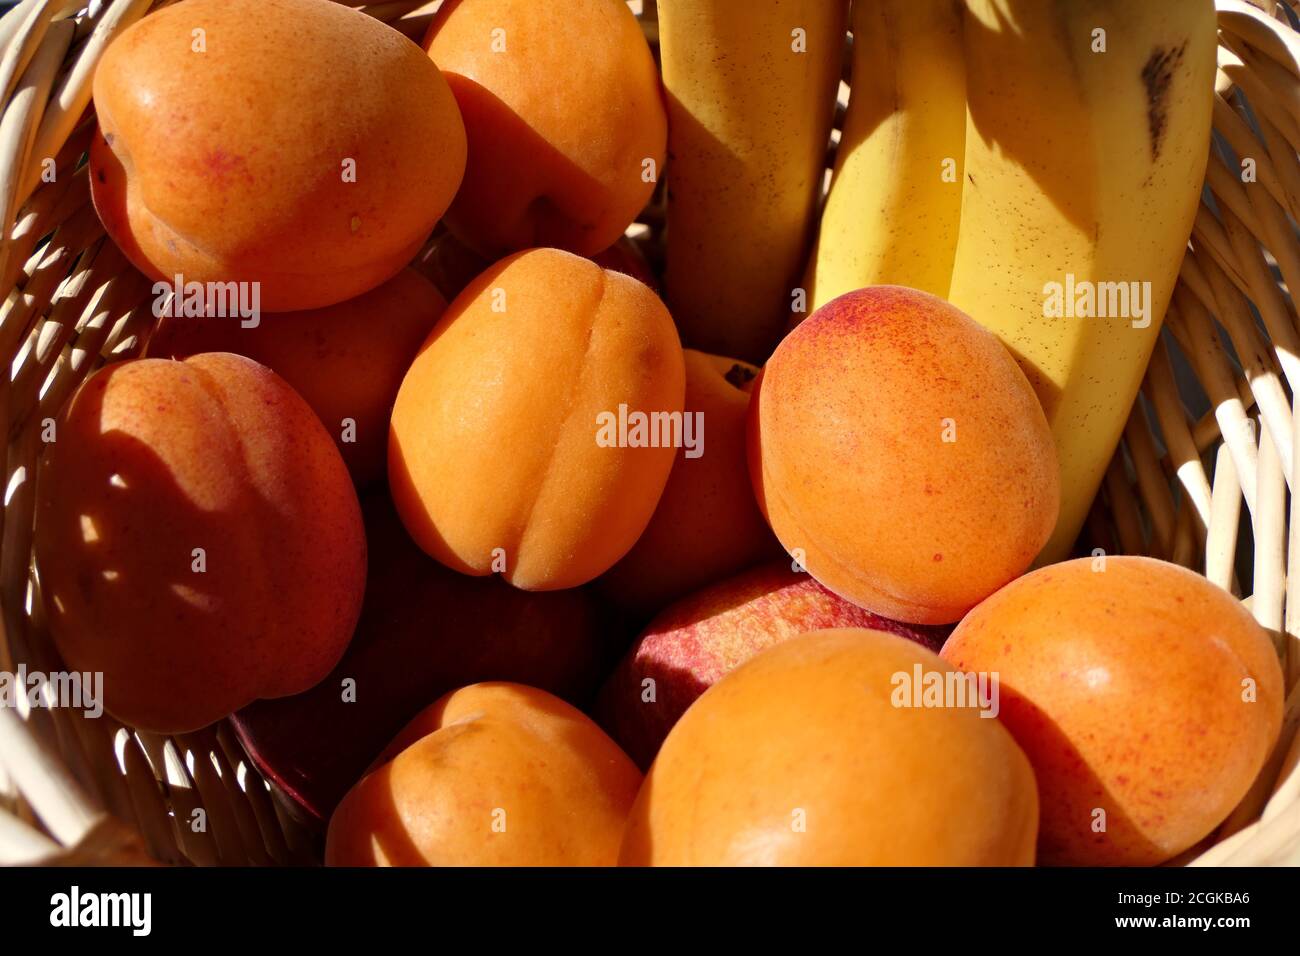 Fruits in a wooden fruit basket - closeup healthy fresh bananas, apricots and apples Stock Photo